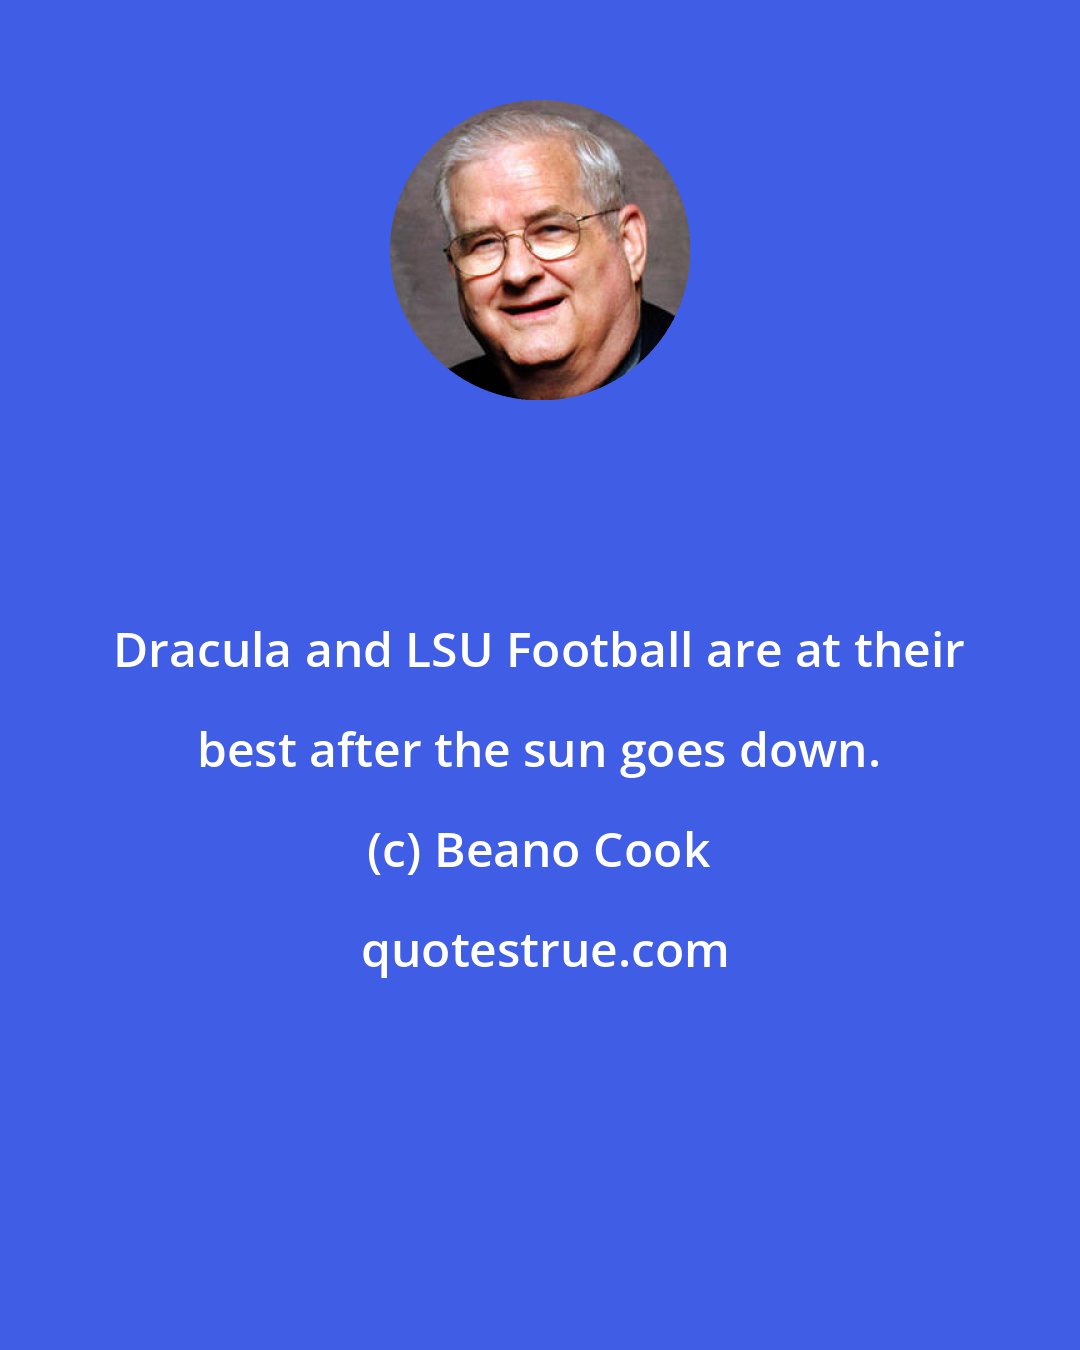 Beano Cook: Dracula and LSU Football are at their best after the sun goes down.